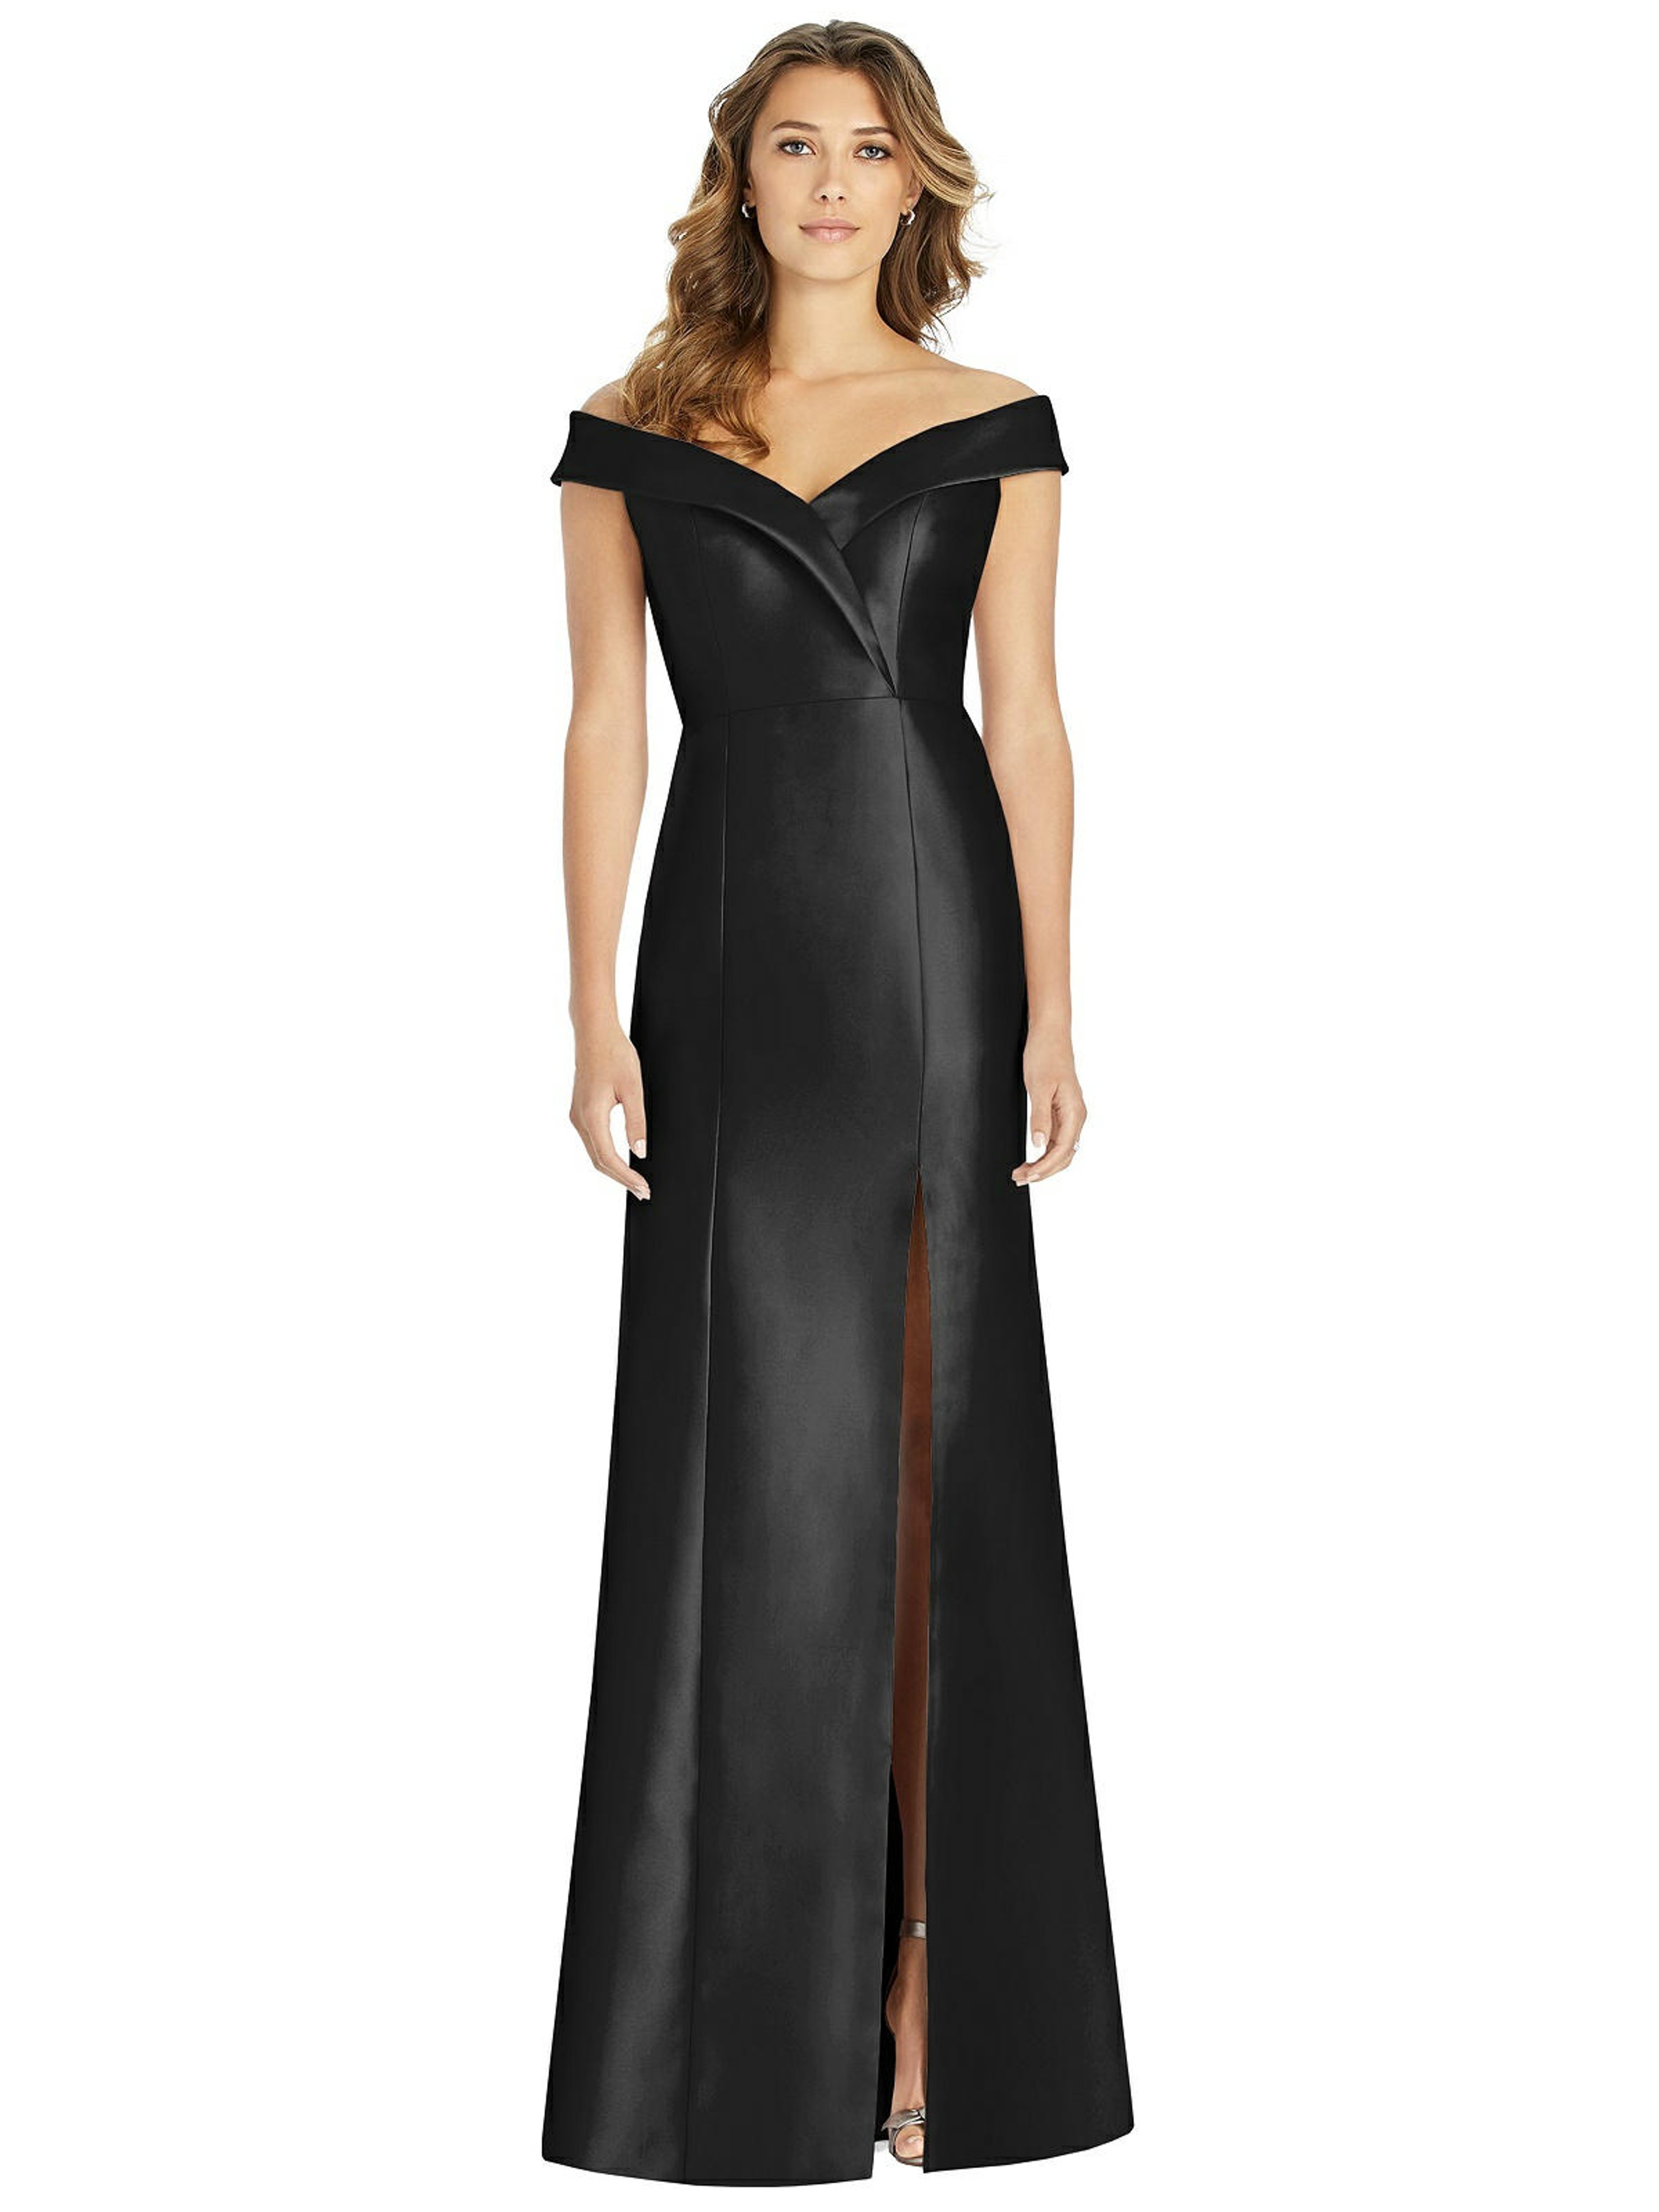 ALFRED SUNG ALFRED SUNG OFF-THE-SHOULDER CUFF TRUMPET GOWN WITH FRONT SLIT